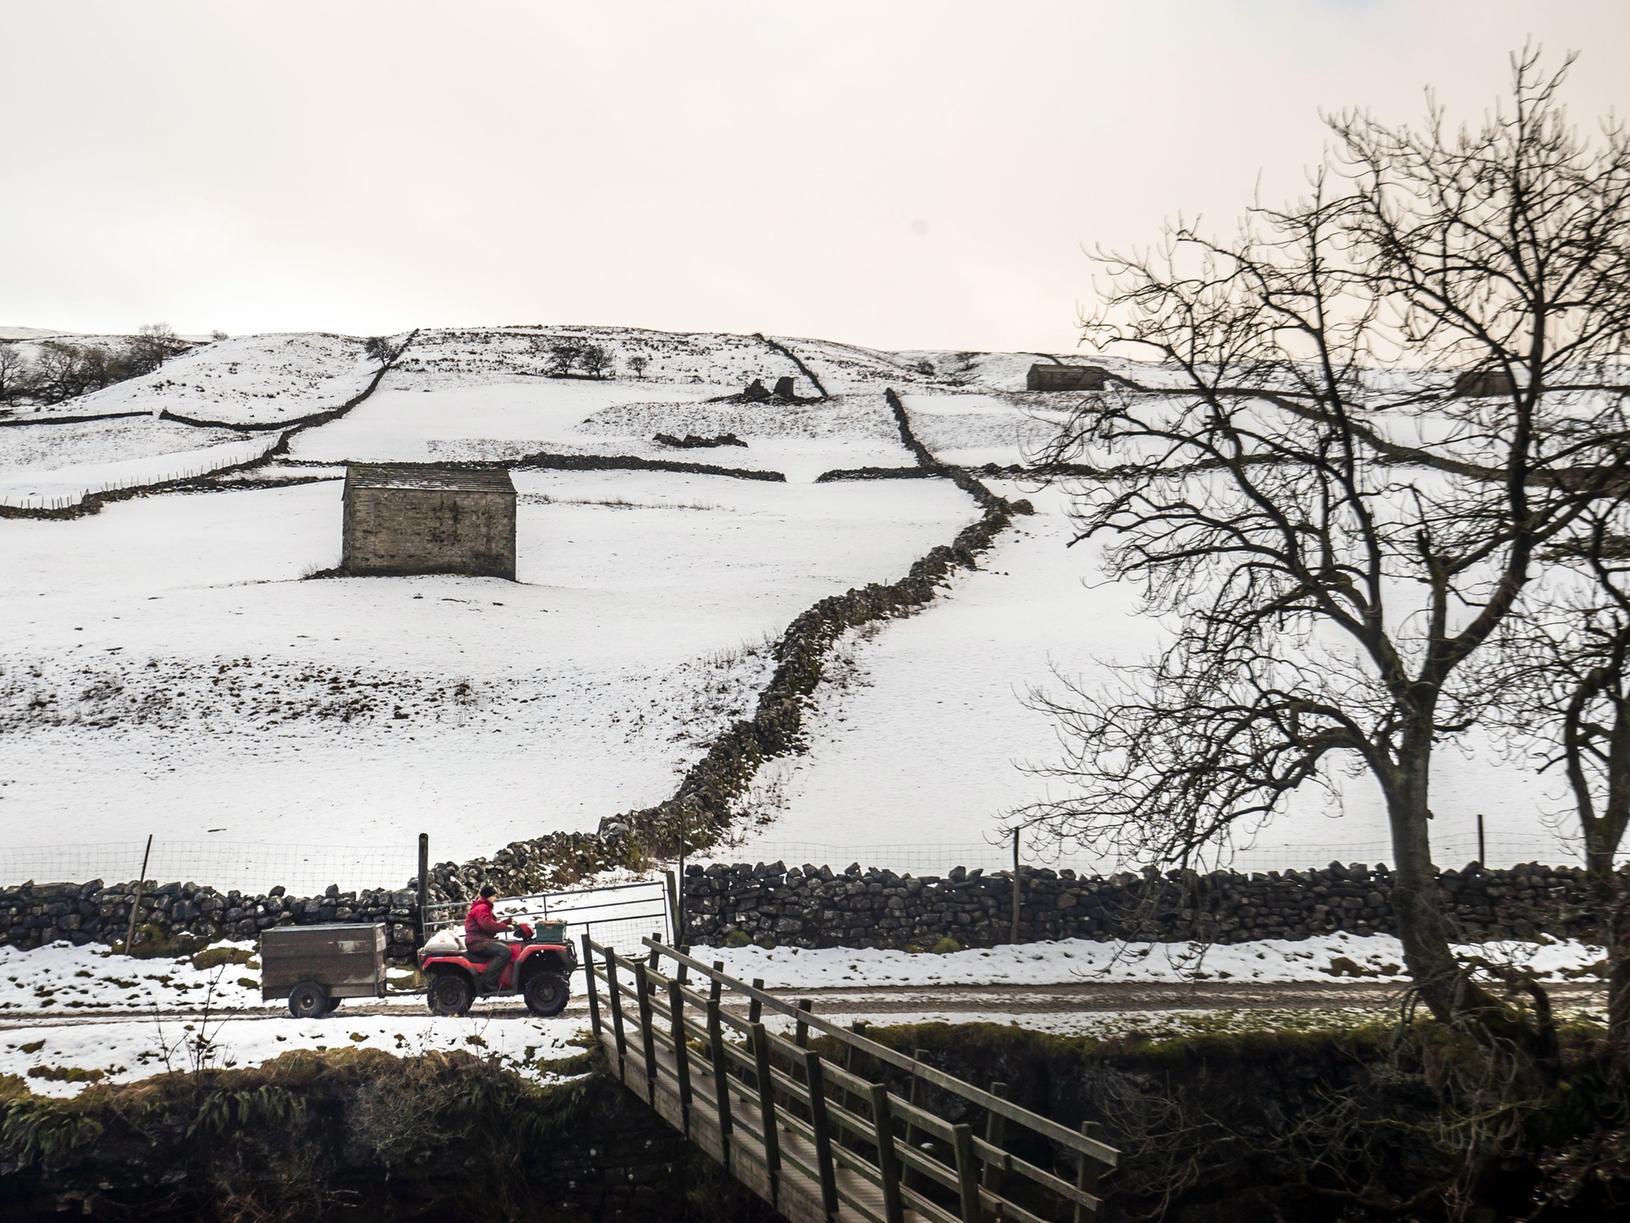 A farmer heads to work in the Dales this morning